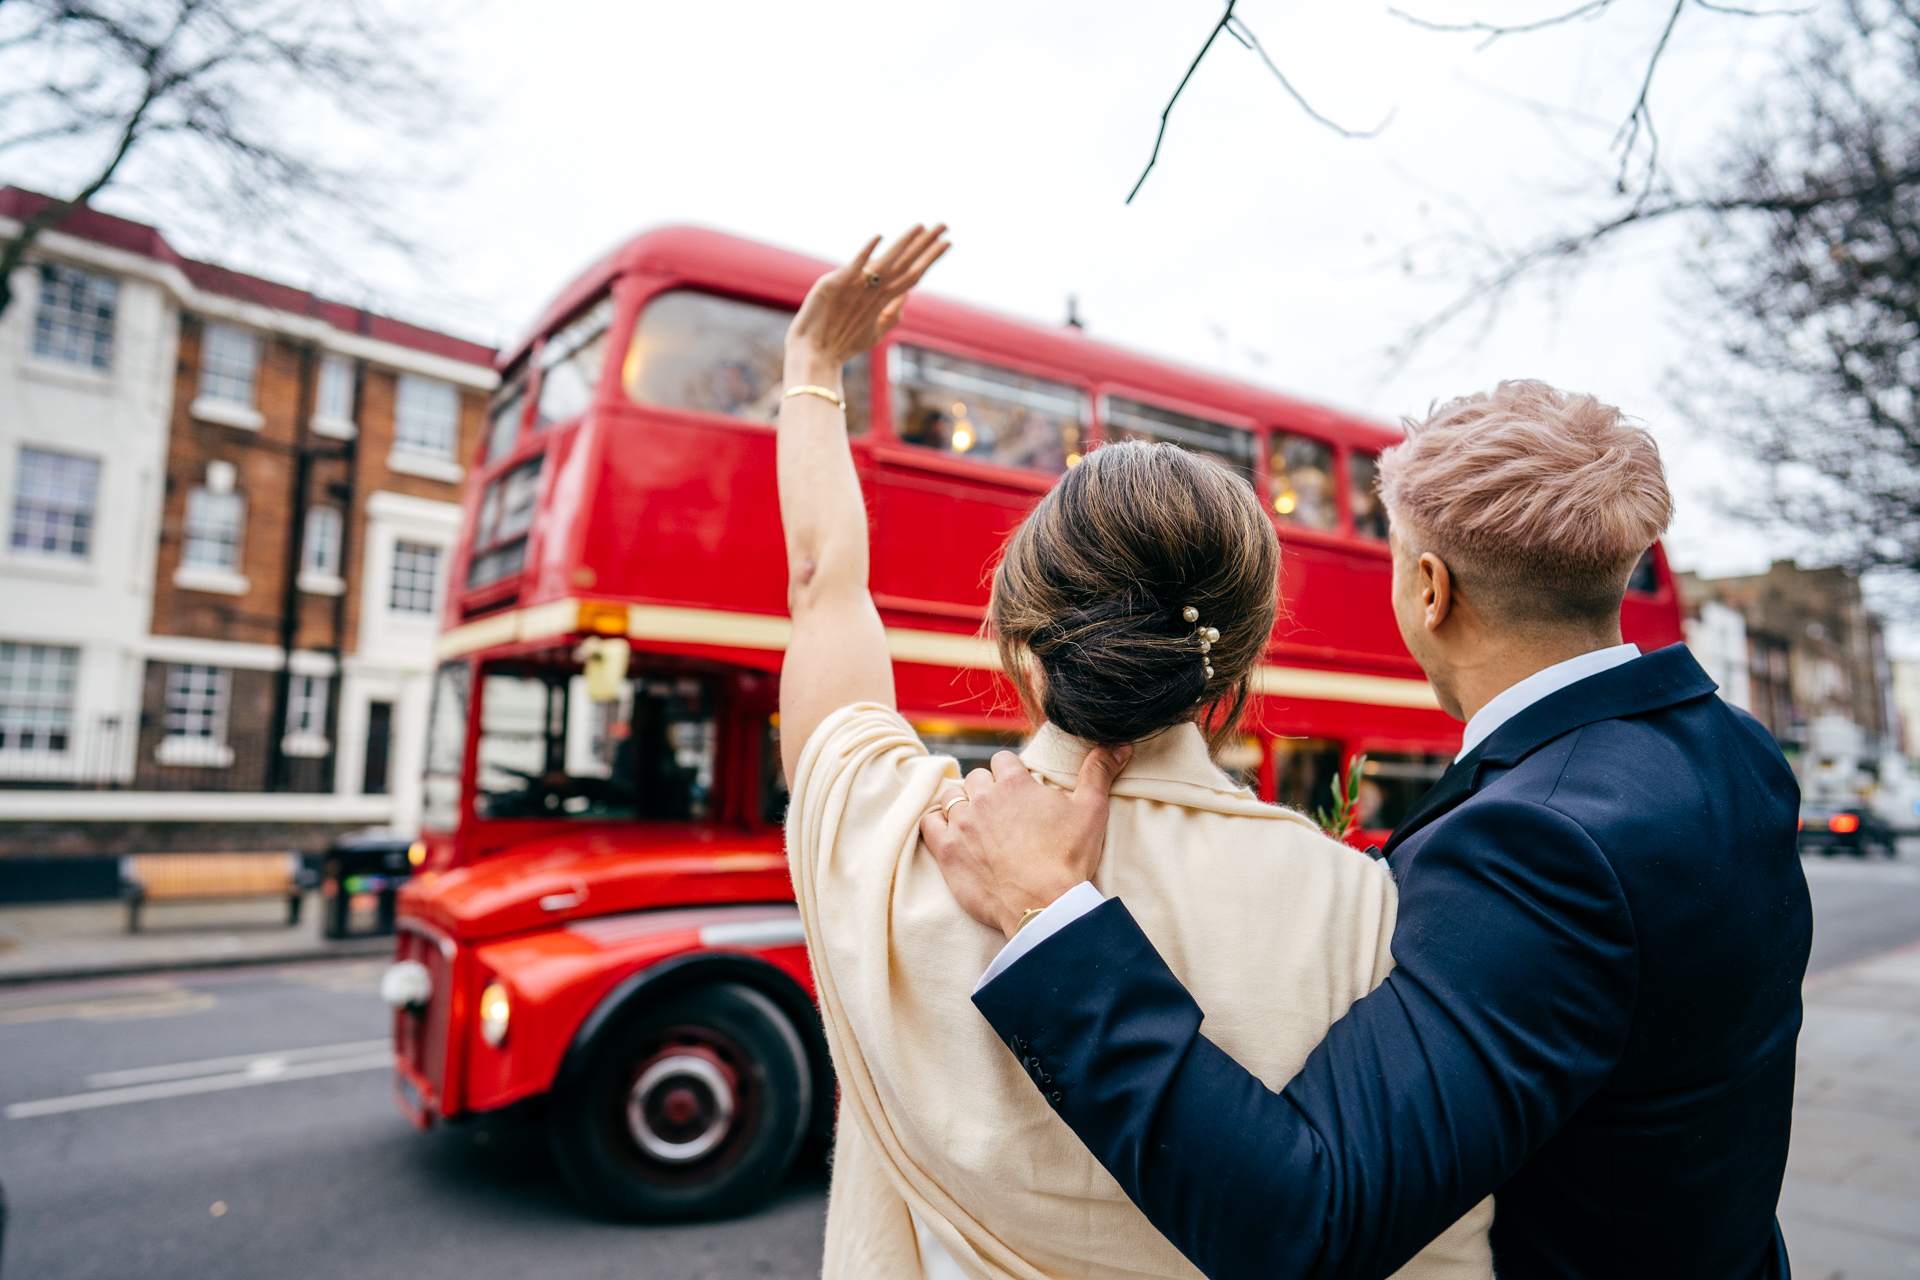 Bride and Groom waving off their wedding red London bus full of guests in London 